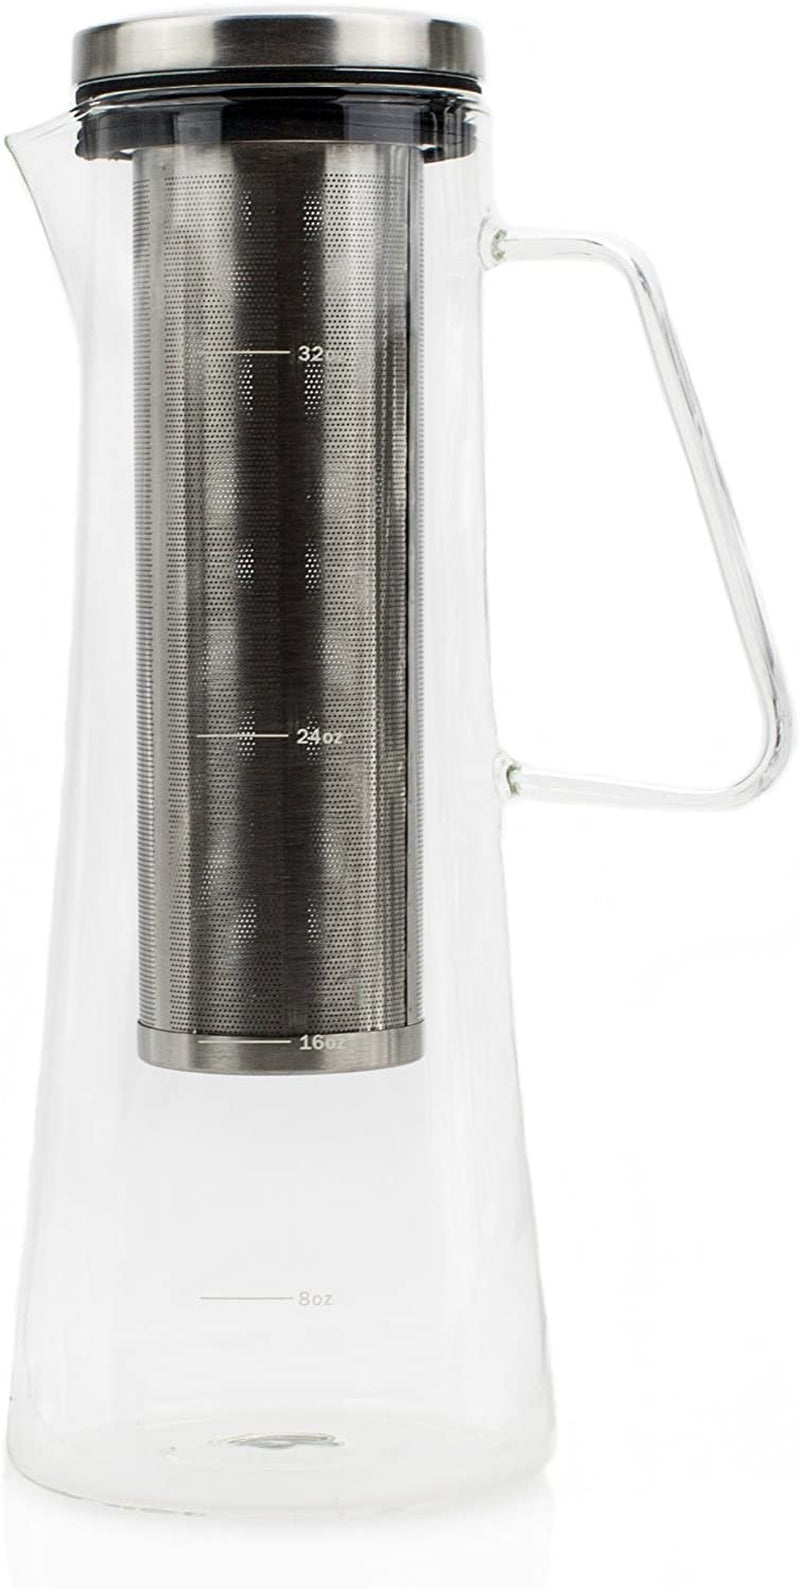 Ultimate Cold Brew Coffee Maker - BPA-Free Glass Pitcher with Stainless Steel Filter, Elegant & Leak-Proof - About Brew